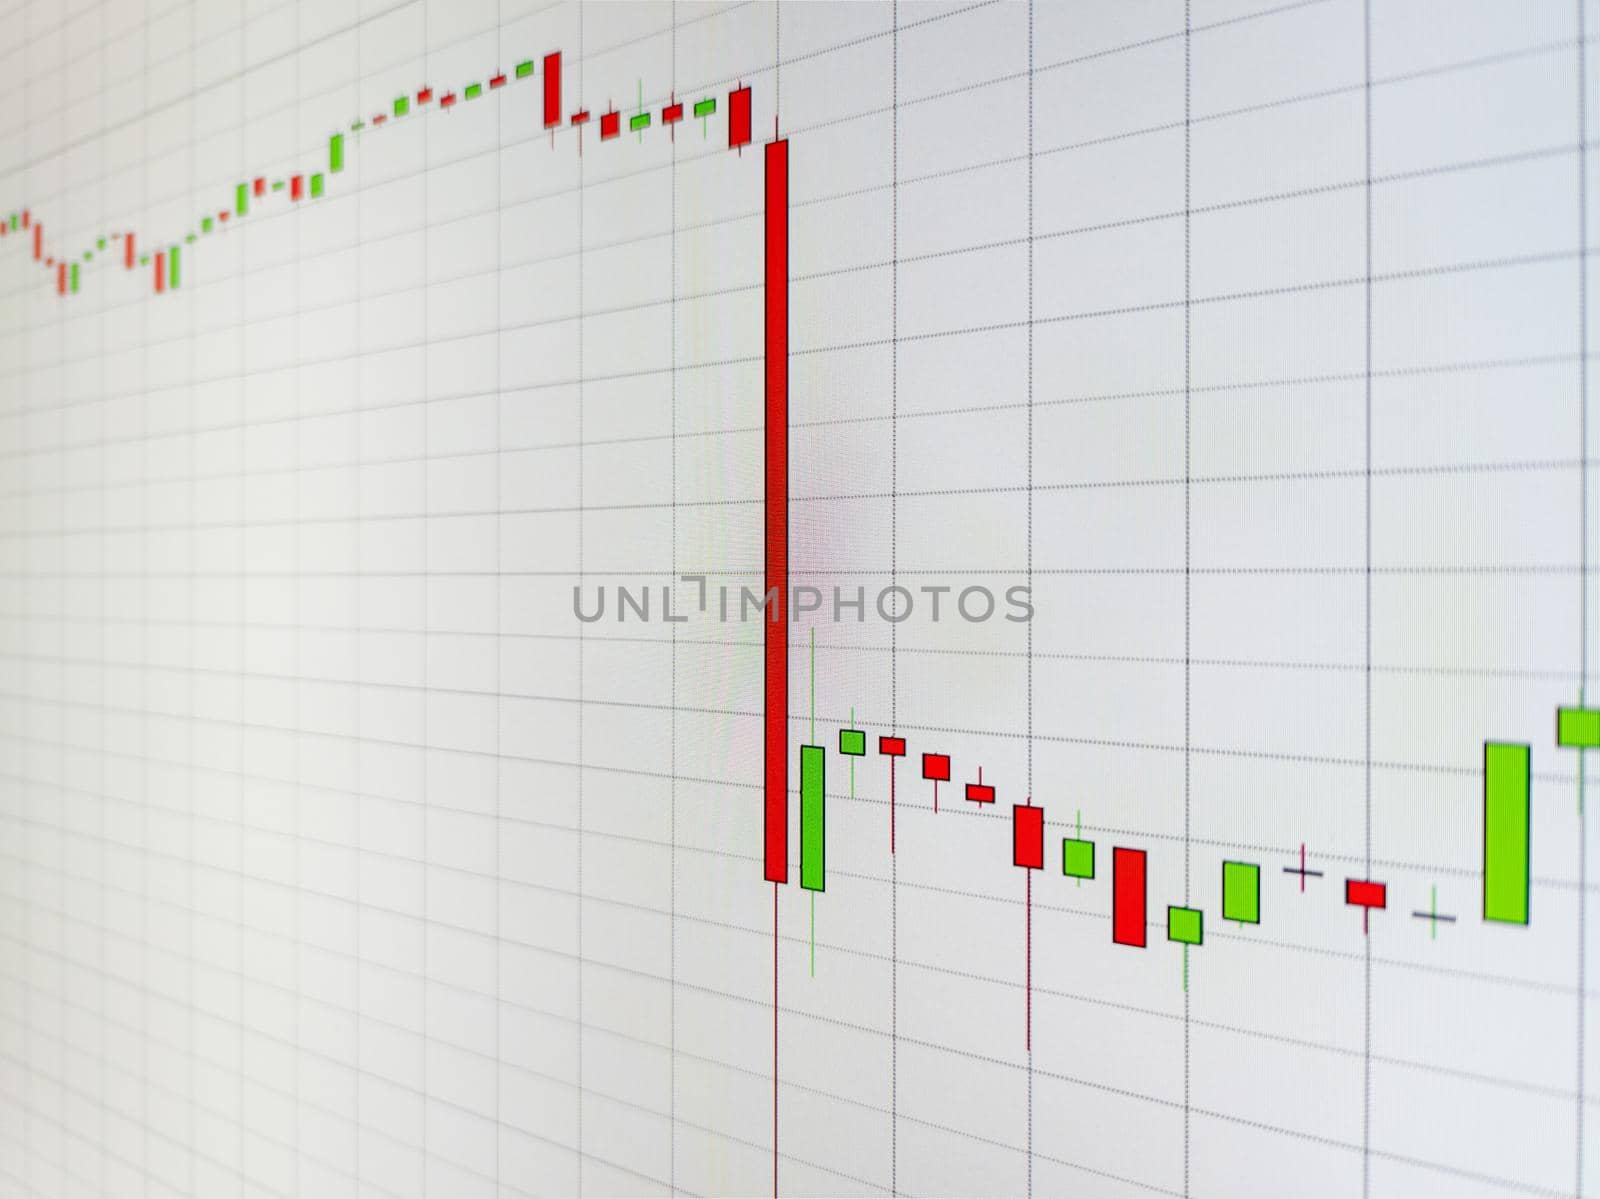 Abstract candlestick chart on white digital screen. Stock market or crypto data chart, graph with rectangular grid on light background. by z1b